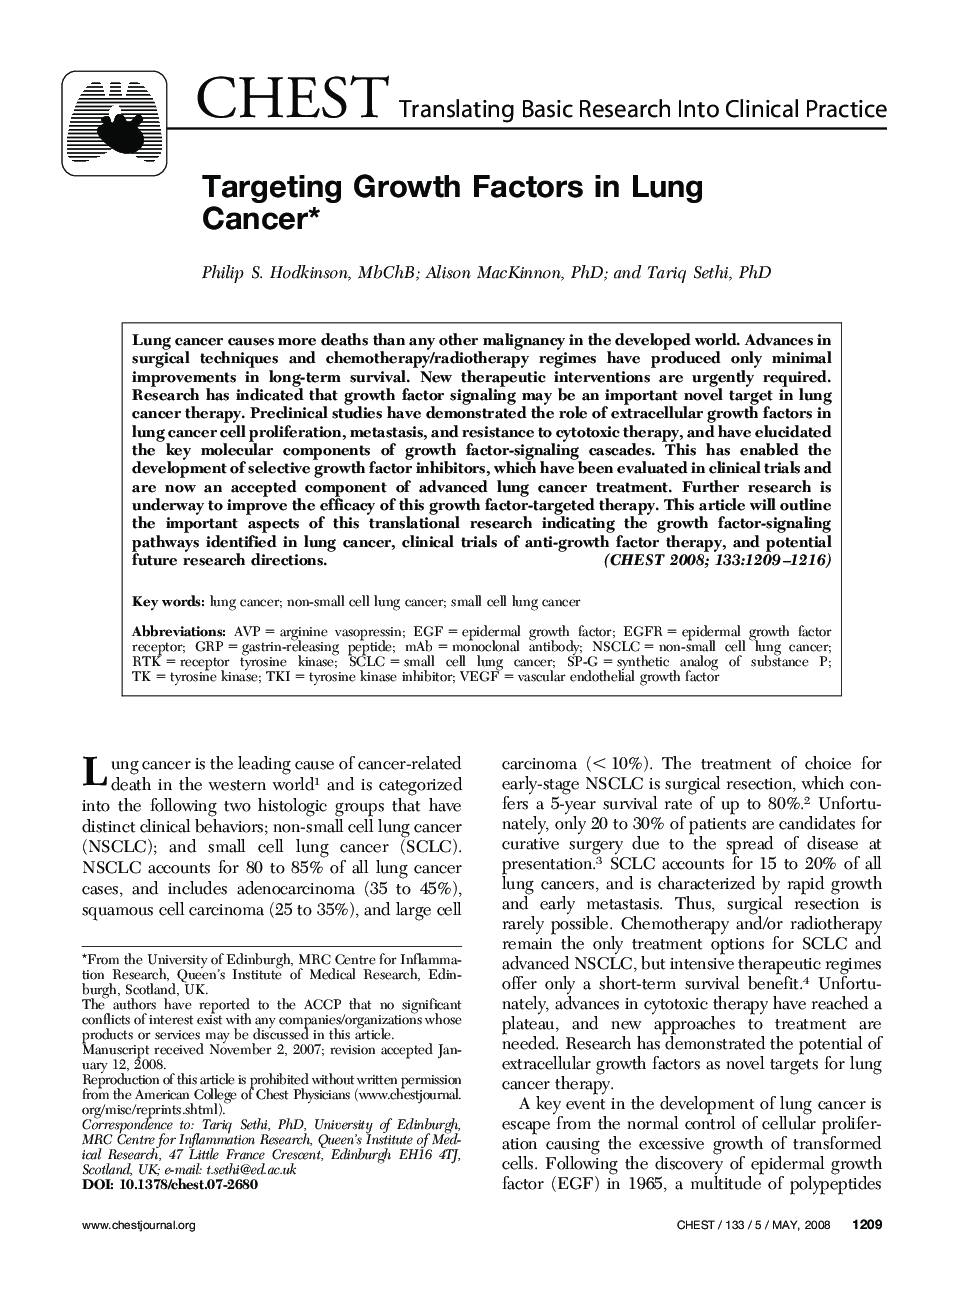 Targeting Growth Factors in Lung Cancer 